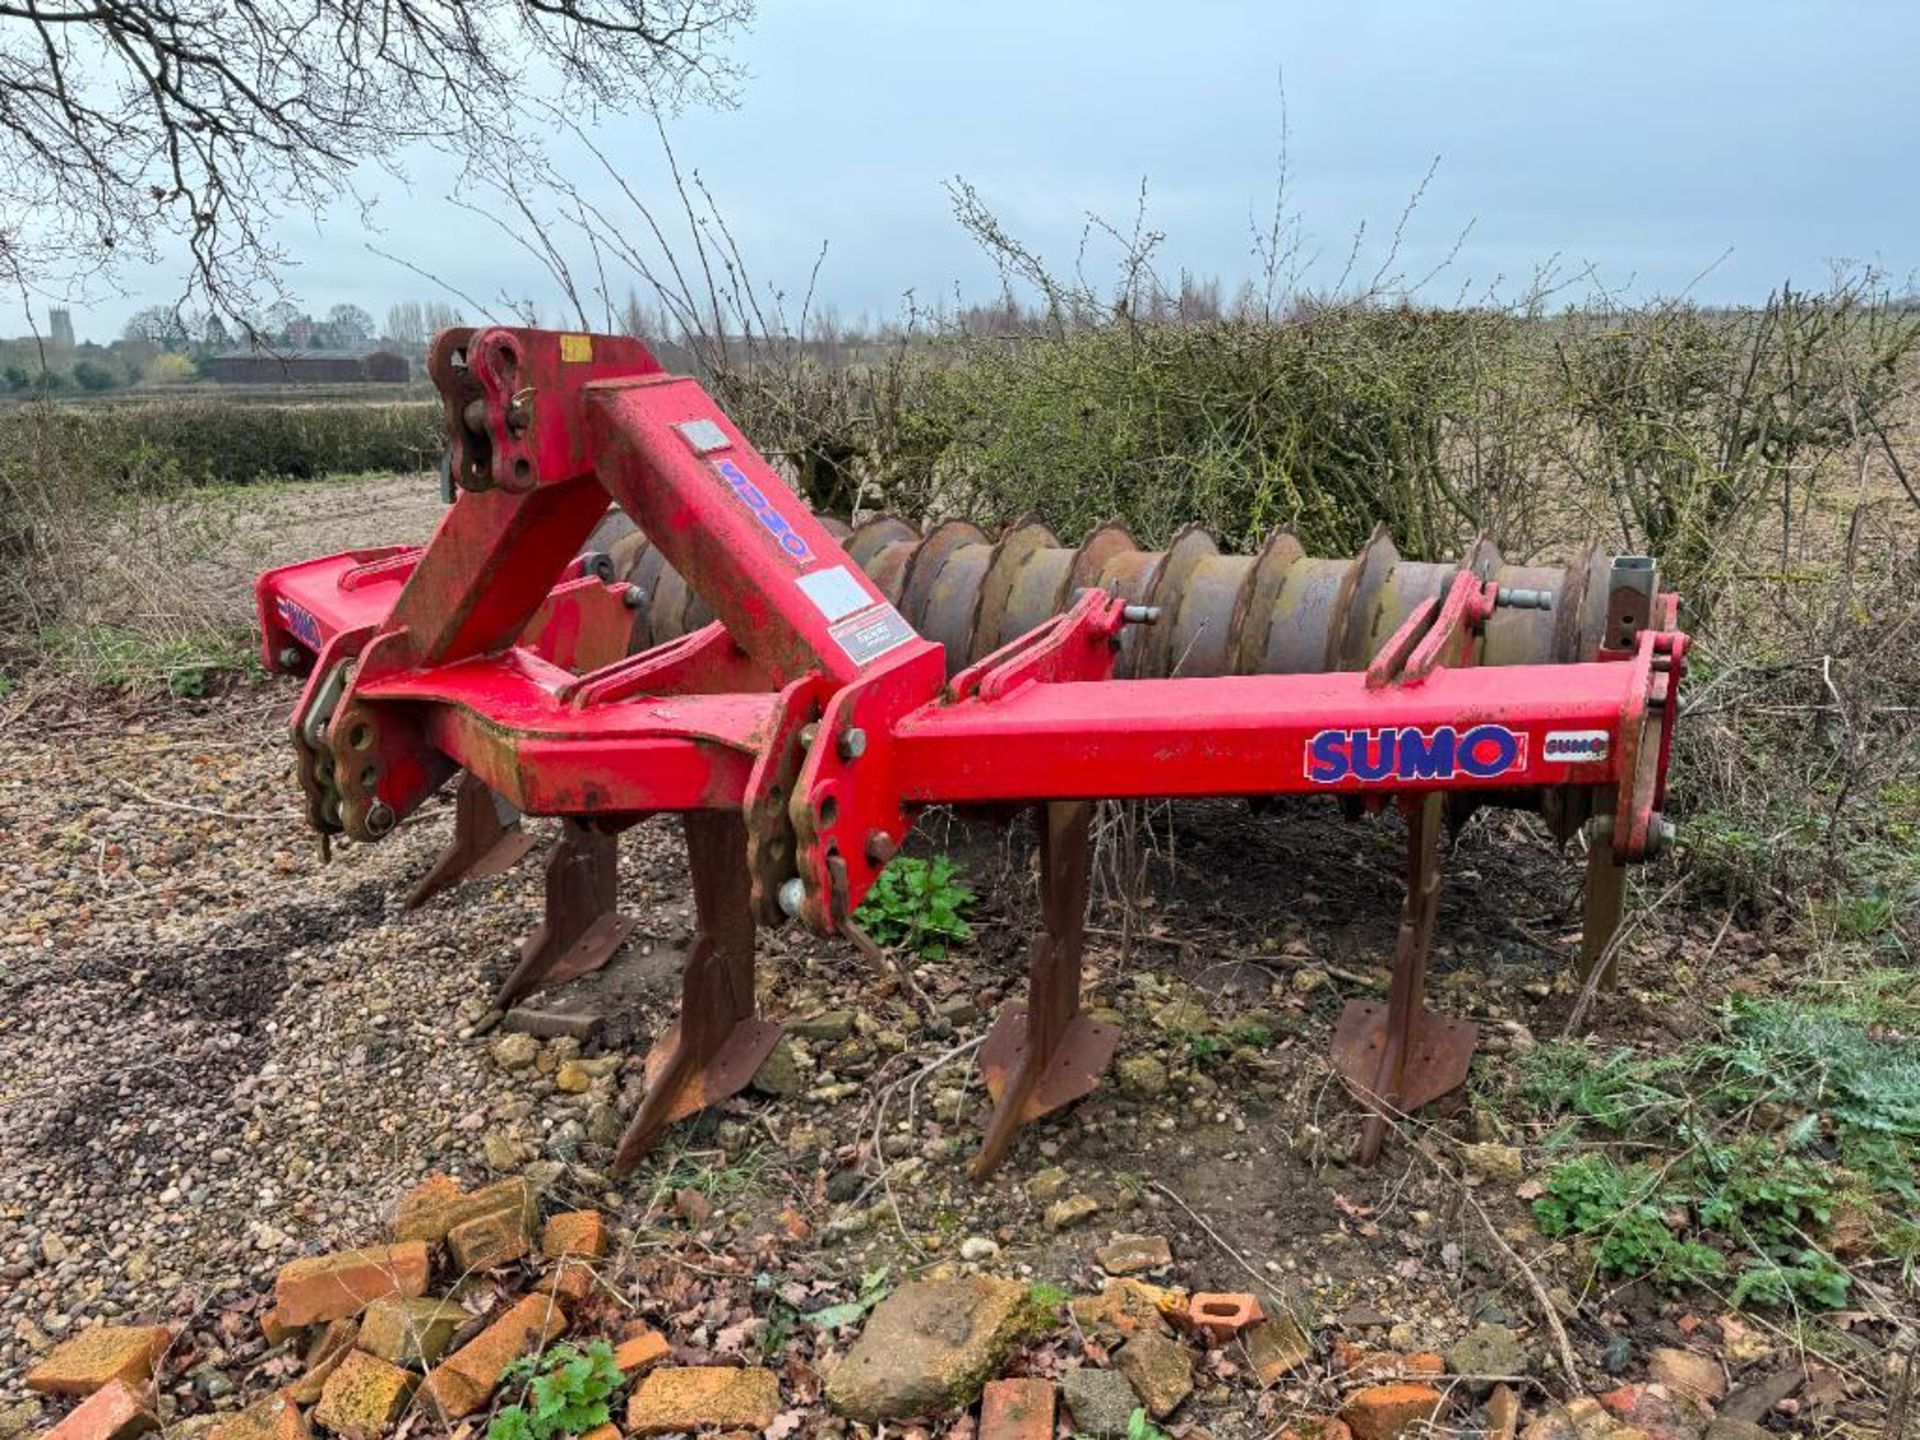 Sumo 5 leg subsoiler with rear packer, linkage mounted. Serial No: 09151 - Image 9 of 9